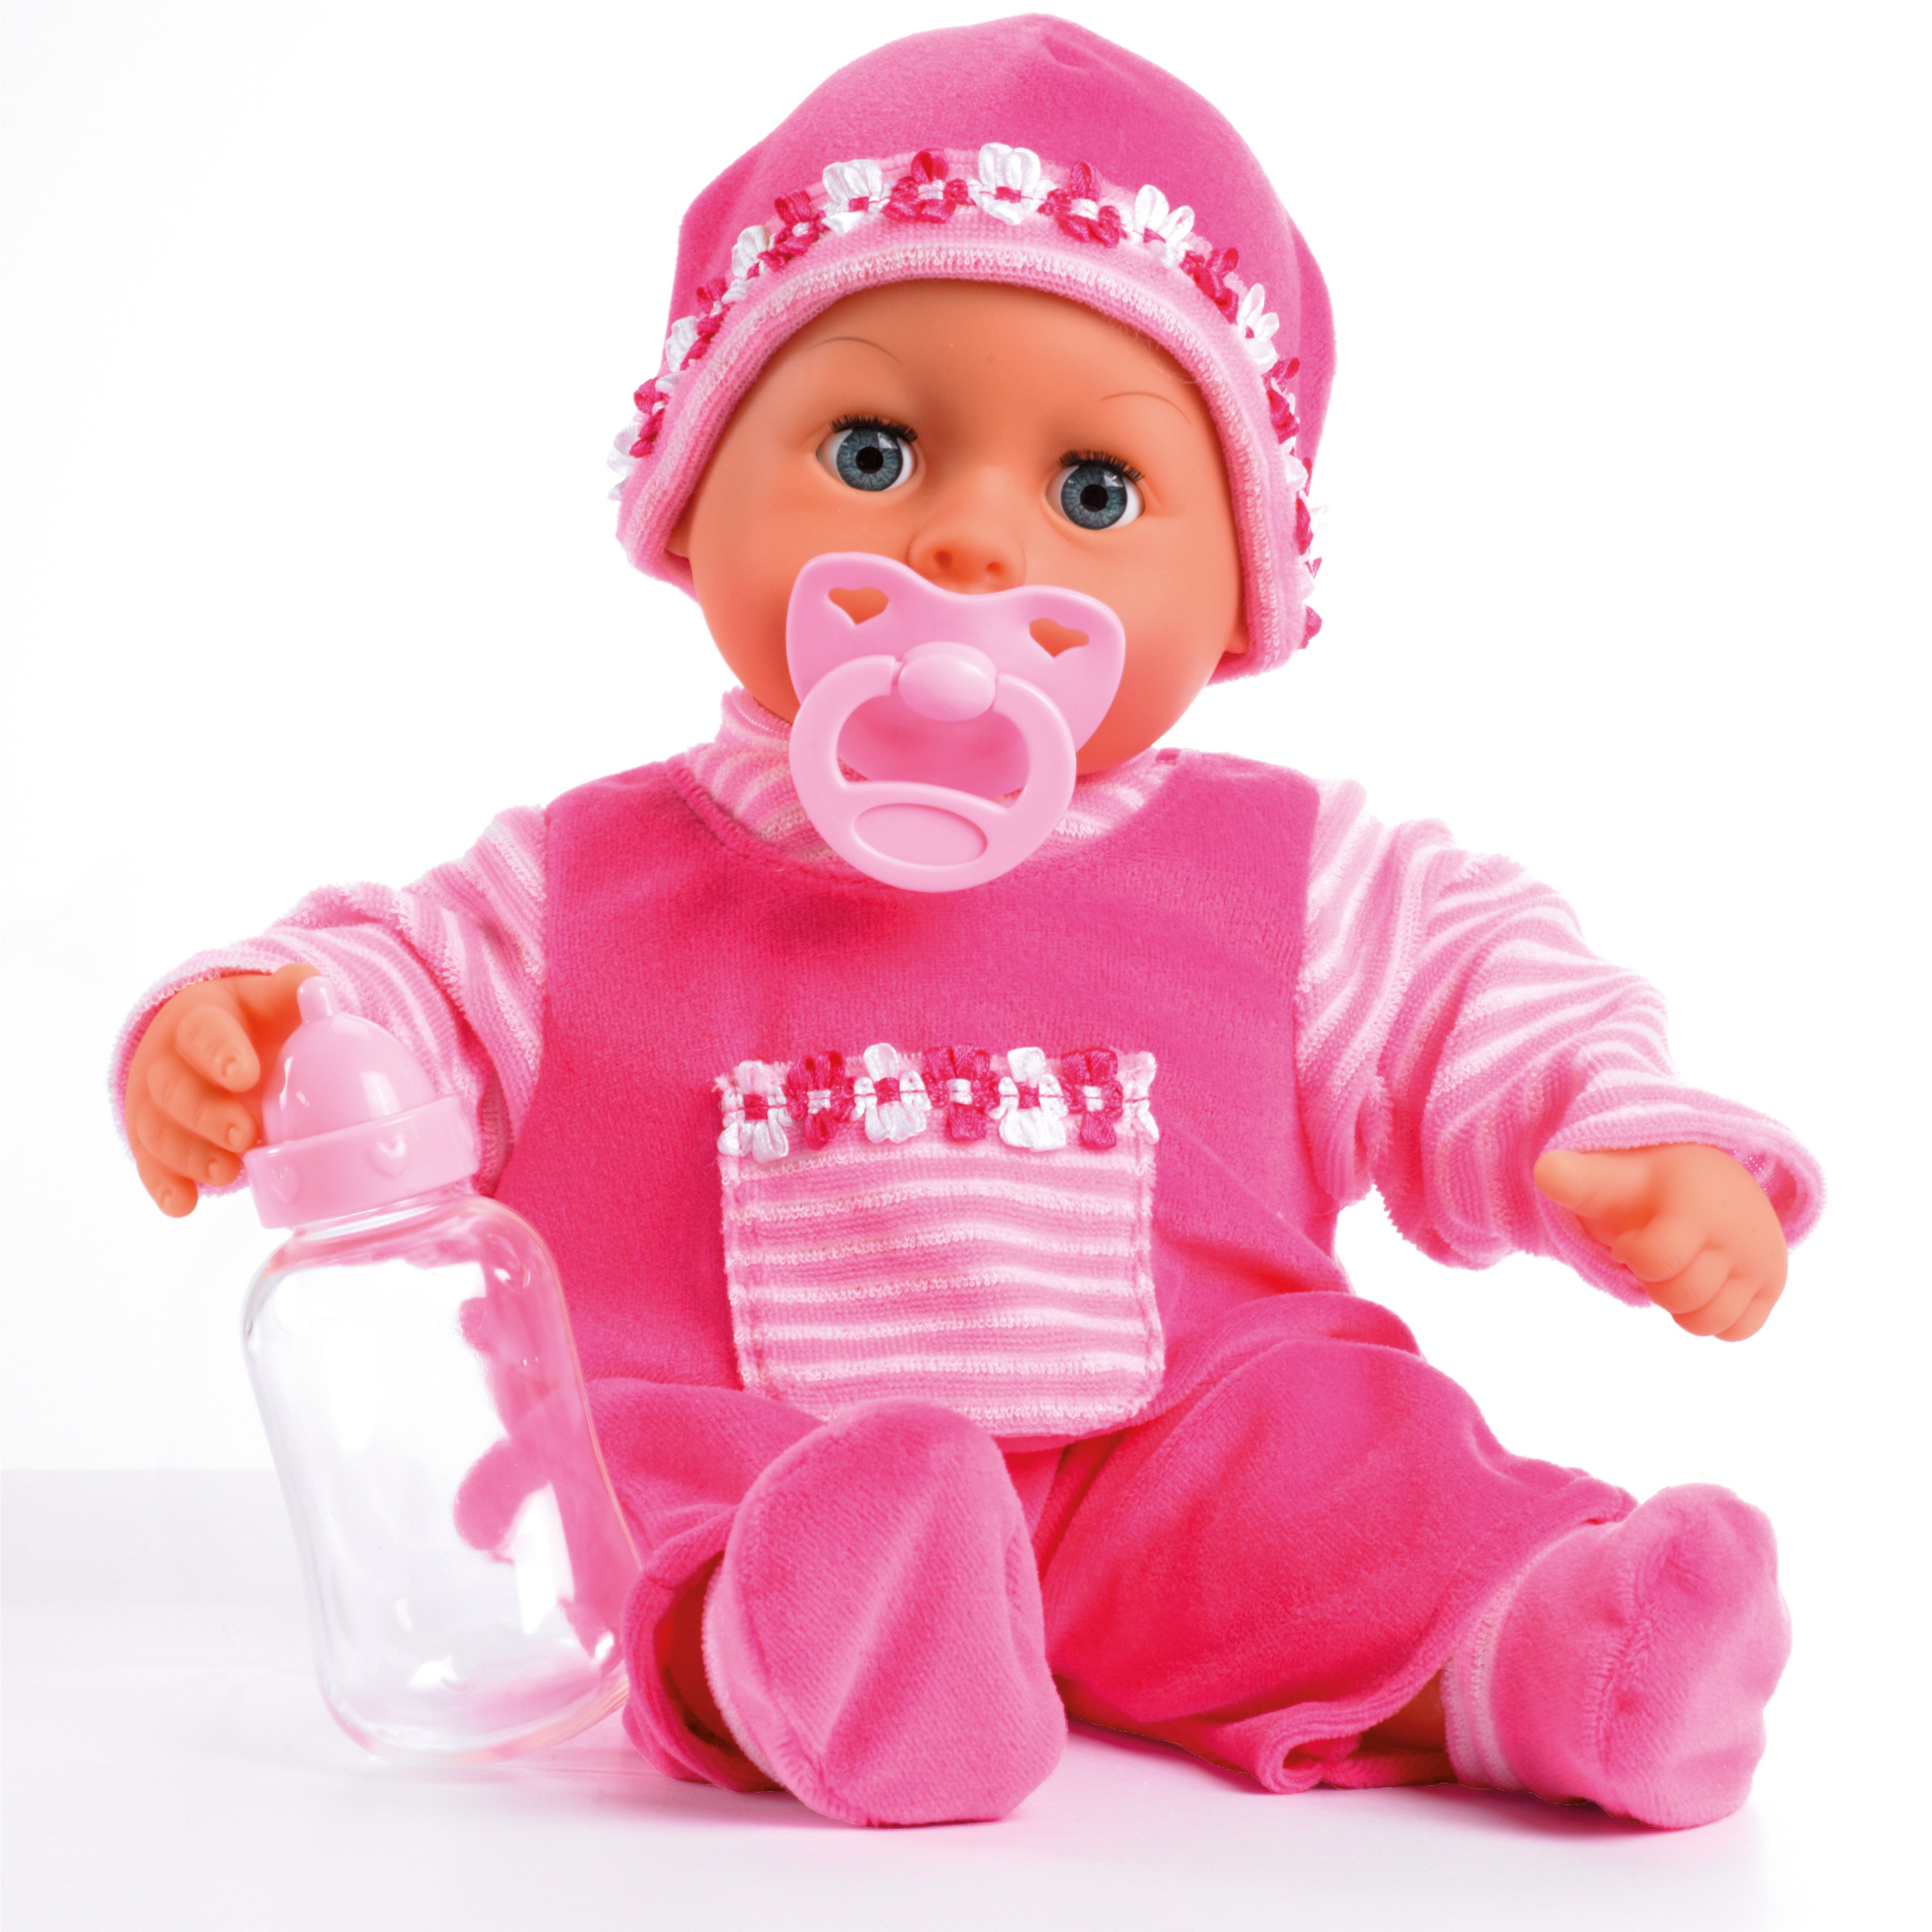 https://scale.coolshop-cdn.com/product-media.coolshop-cdn.com/AH5N26/47b76fffbb124fc0870b63c43d034bde.jpeg/f/bayer-doll-first-words-baby-pink-38-cm-93825aa.jpeg